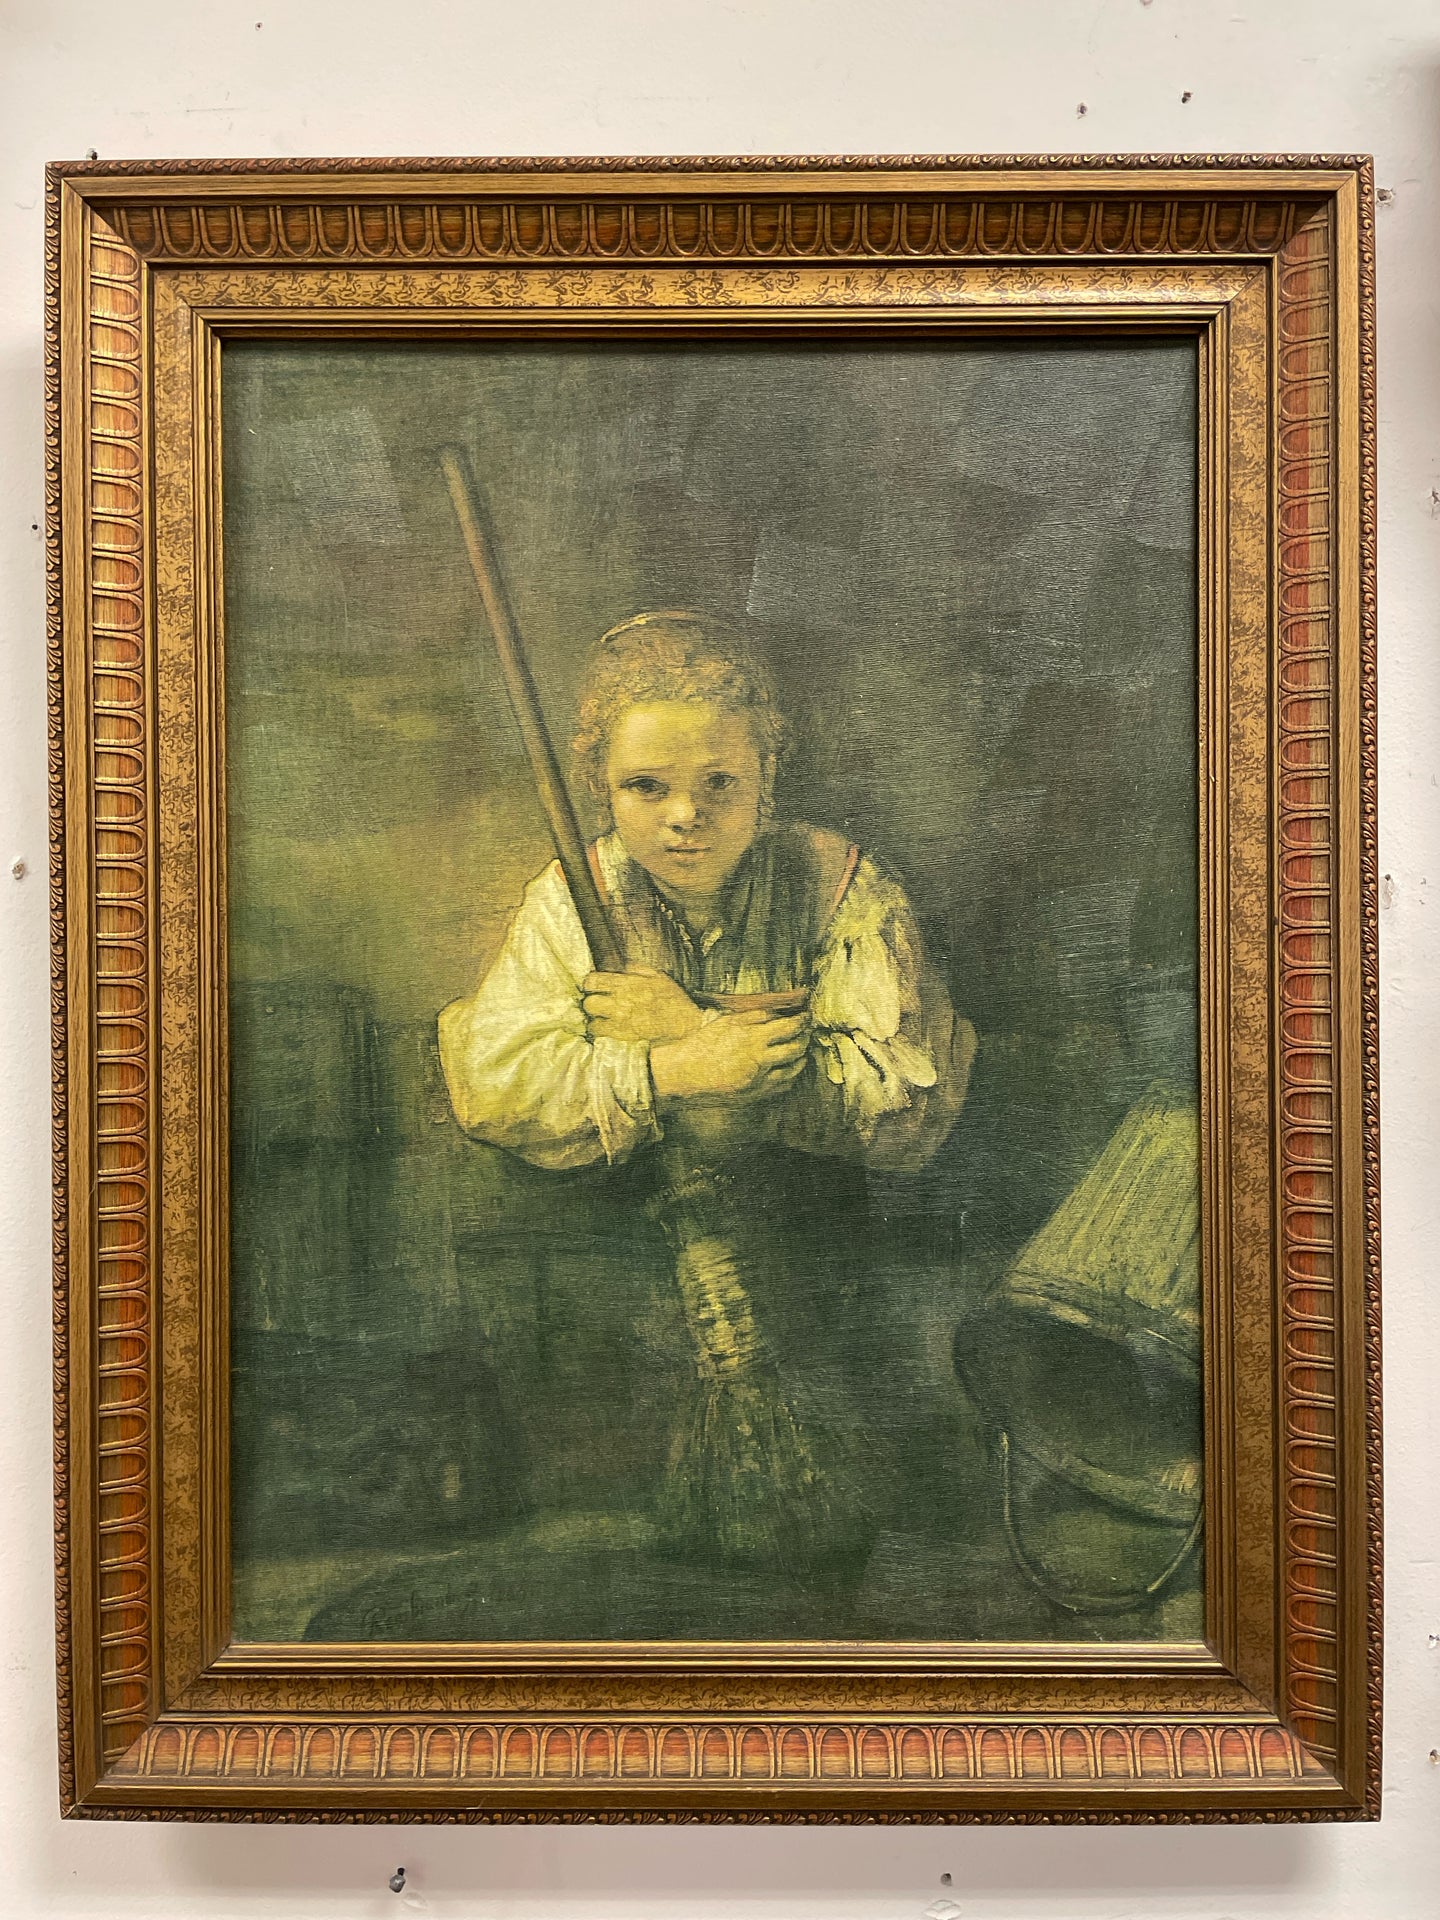 Framed Reproduction Rembrandt on Canvas of Girl with Broom